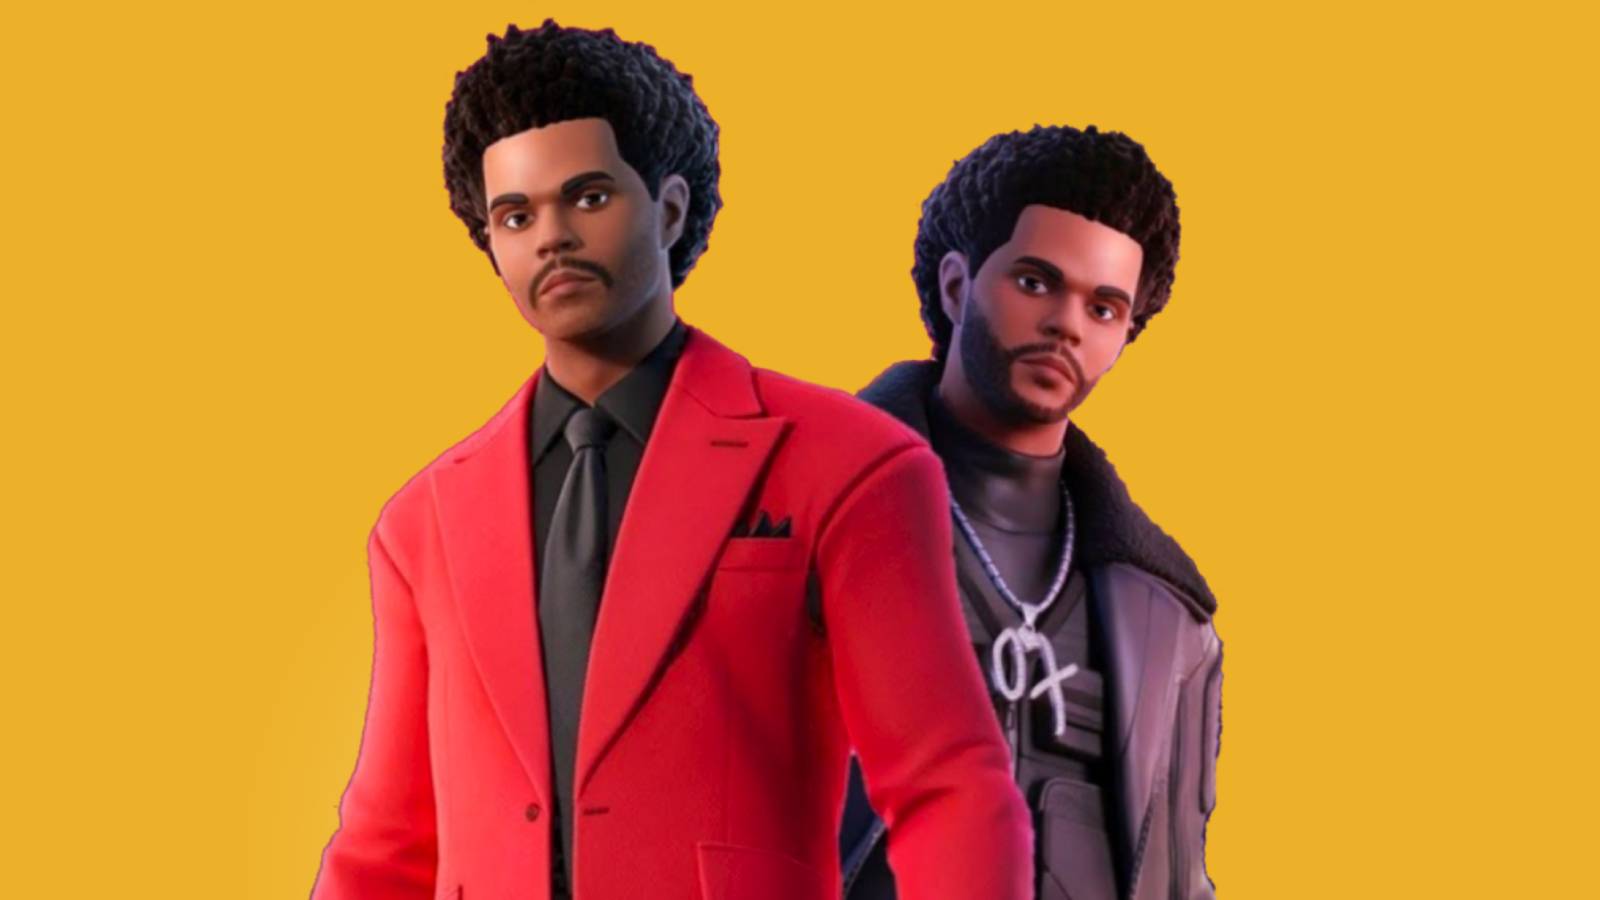 https://editors.dexerto.com/wp-content/uploads/2023/12/07/TheWeeknd-Fortnite-Outfit-Skin.jpg